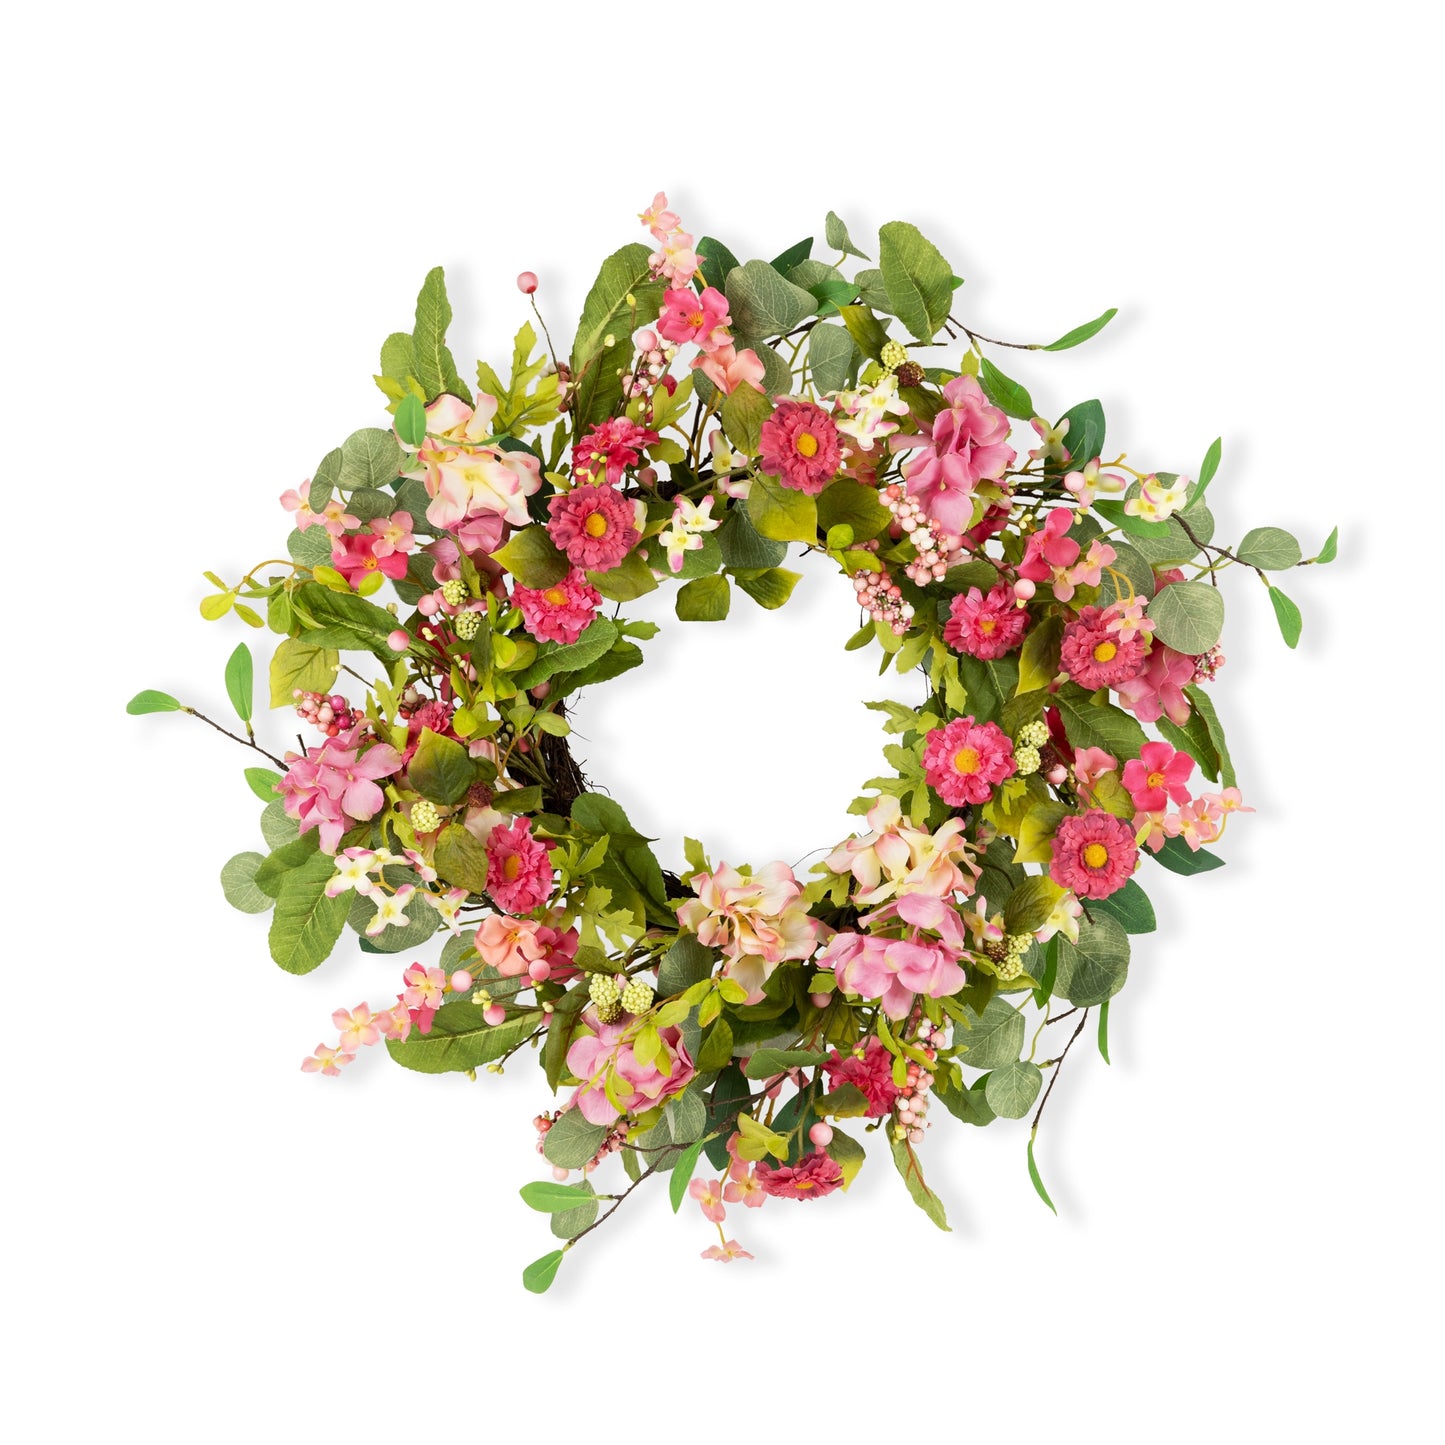 Mixed Floral Wreath 28"D Twig/Fabric